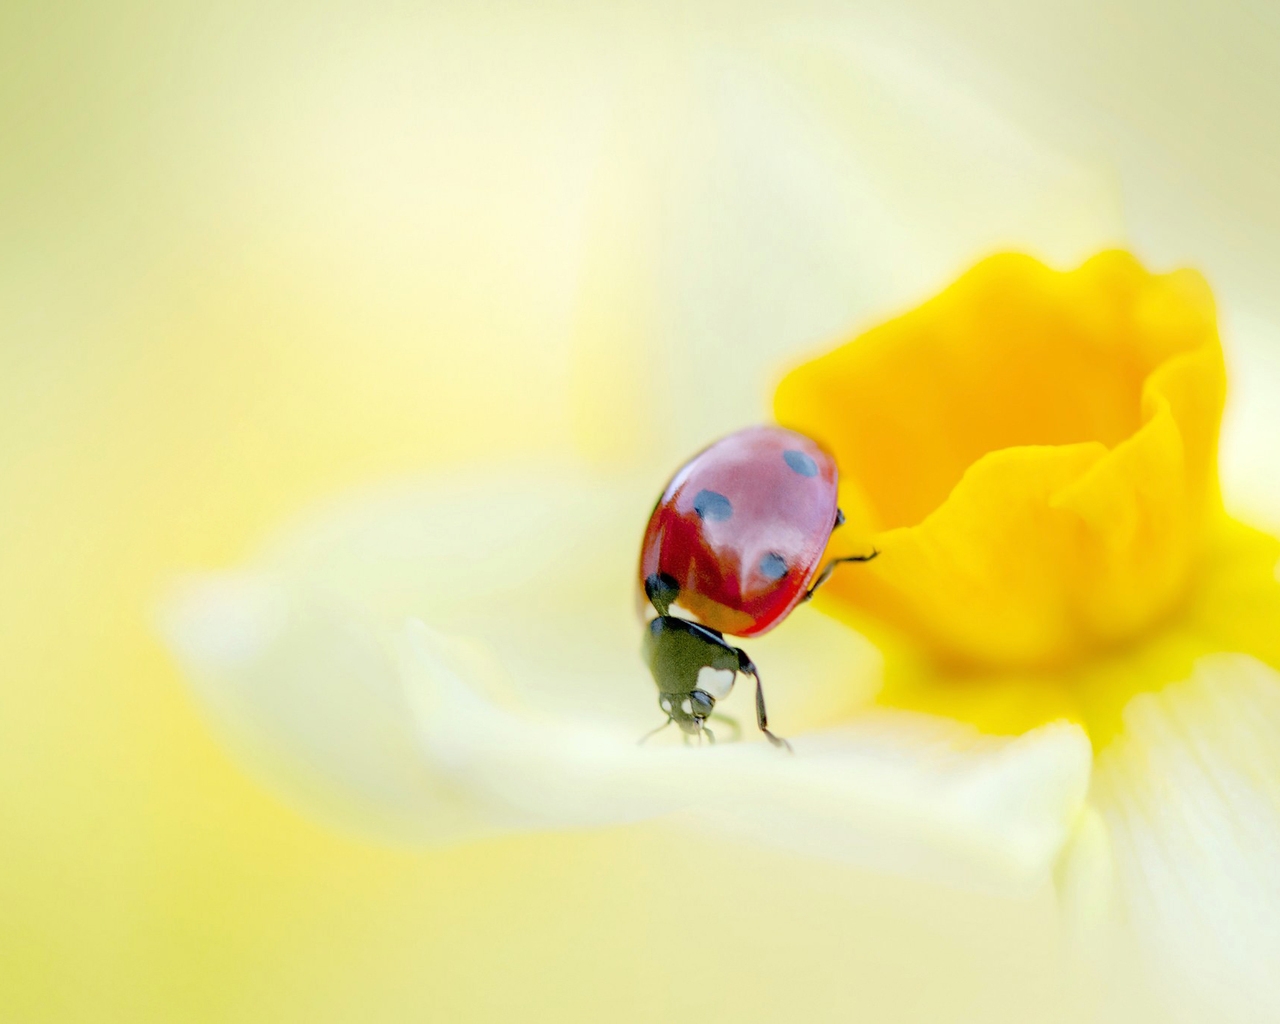 Ladybird on a Yellow Daffodil Flower  for 1280 x 1024 resolution